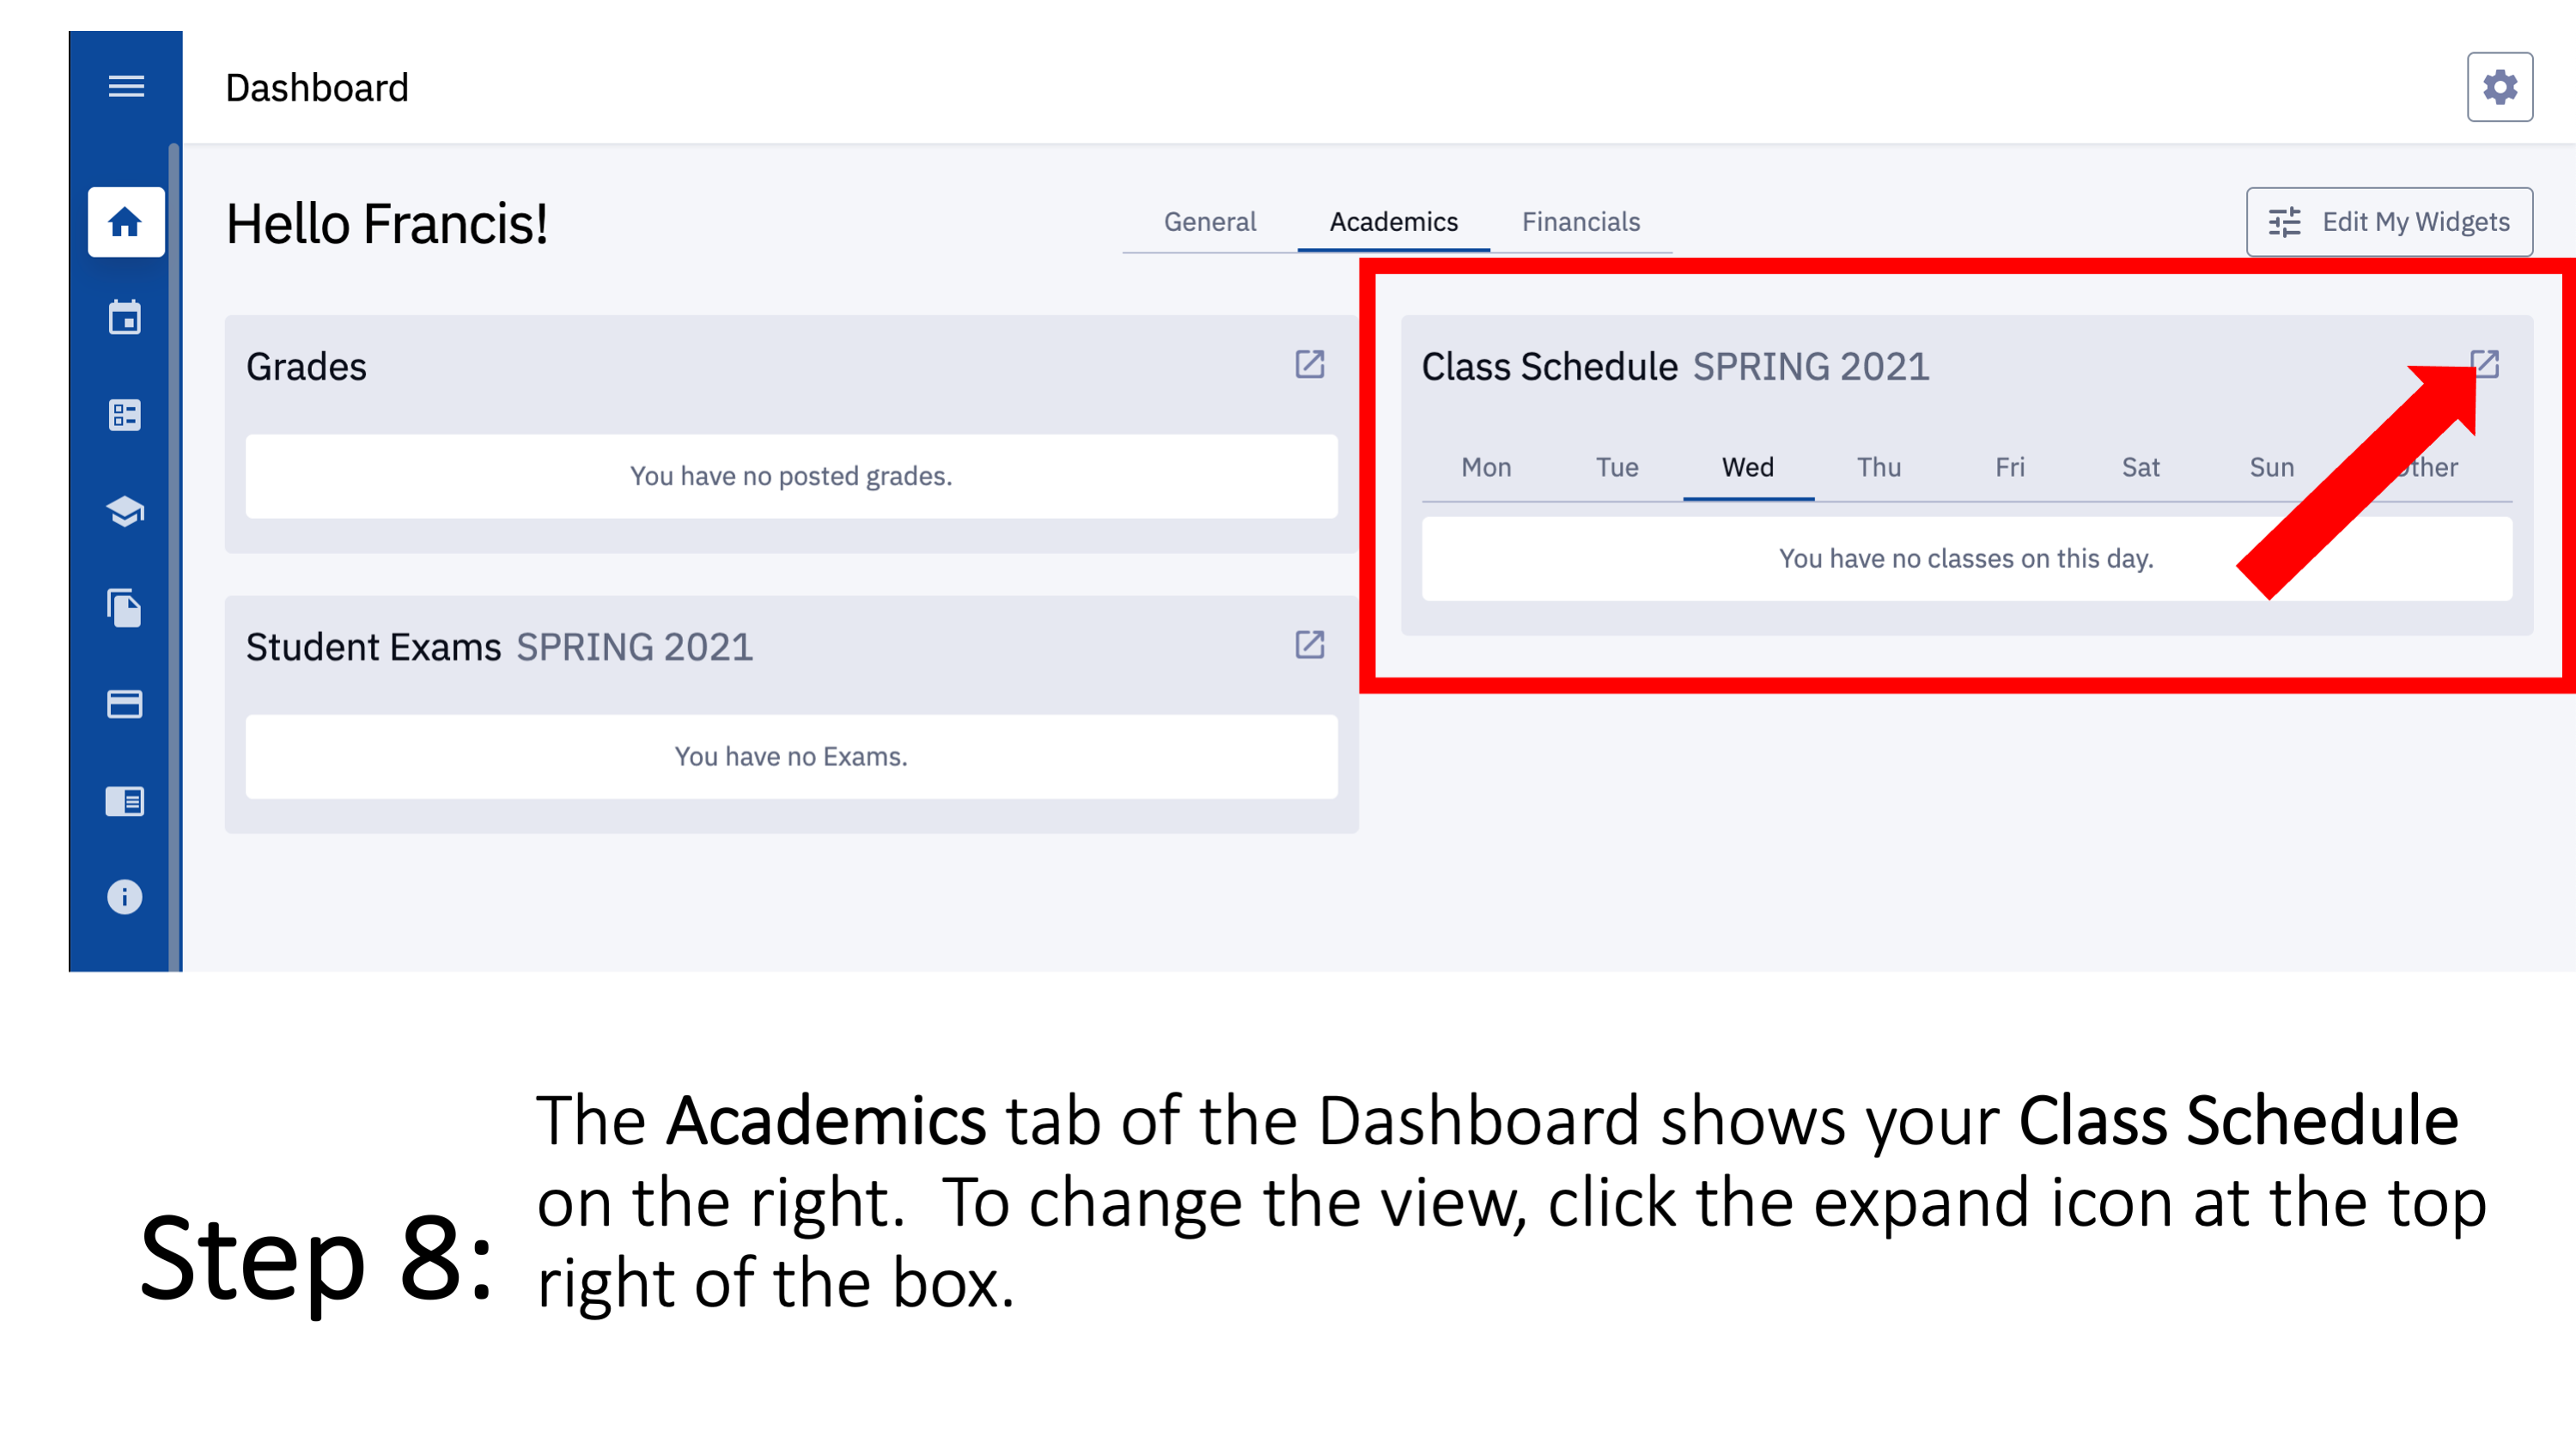 Step 8: The Academics tab of the Dashboard shows your Class Schedule on the right.  To change the view, click the expand icon at the top right of the box.